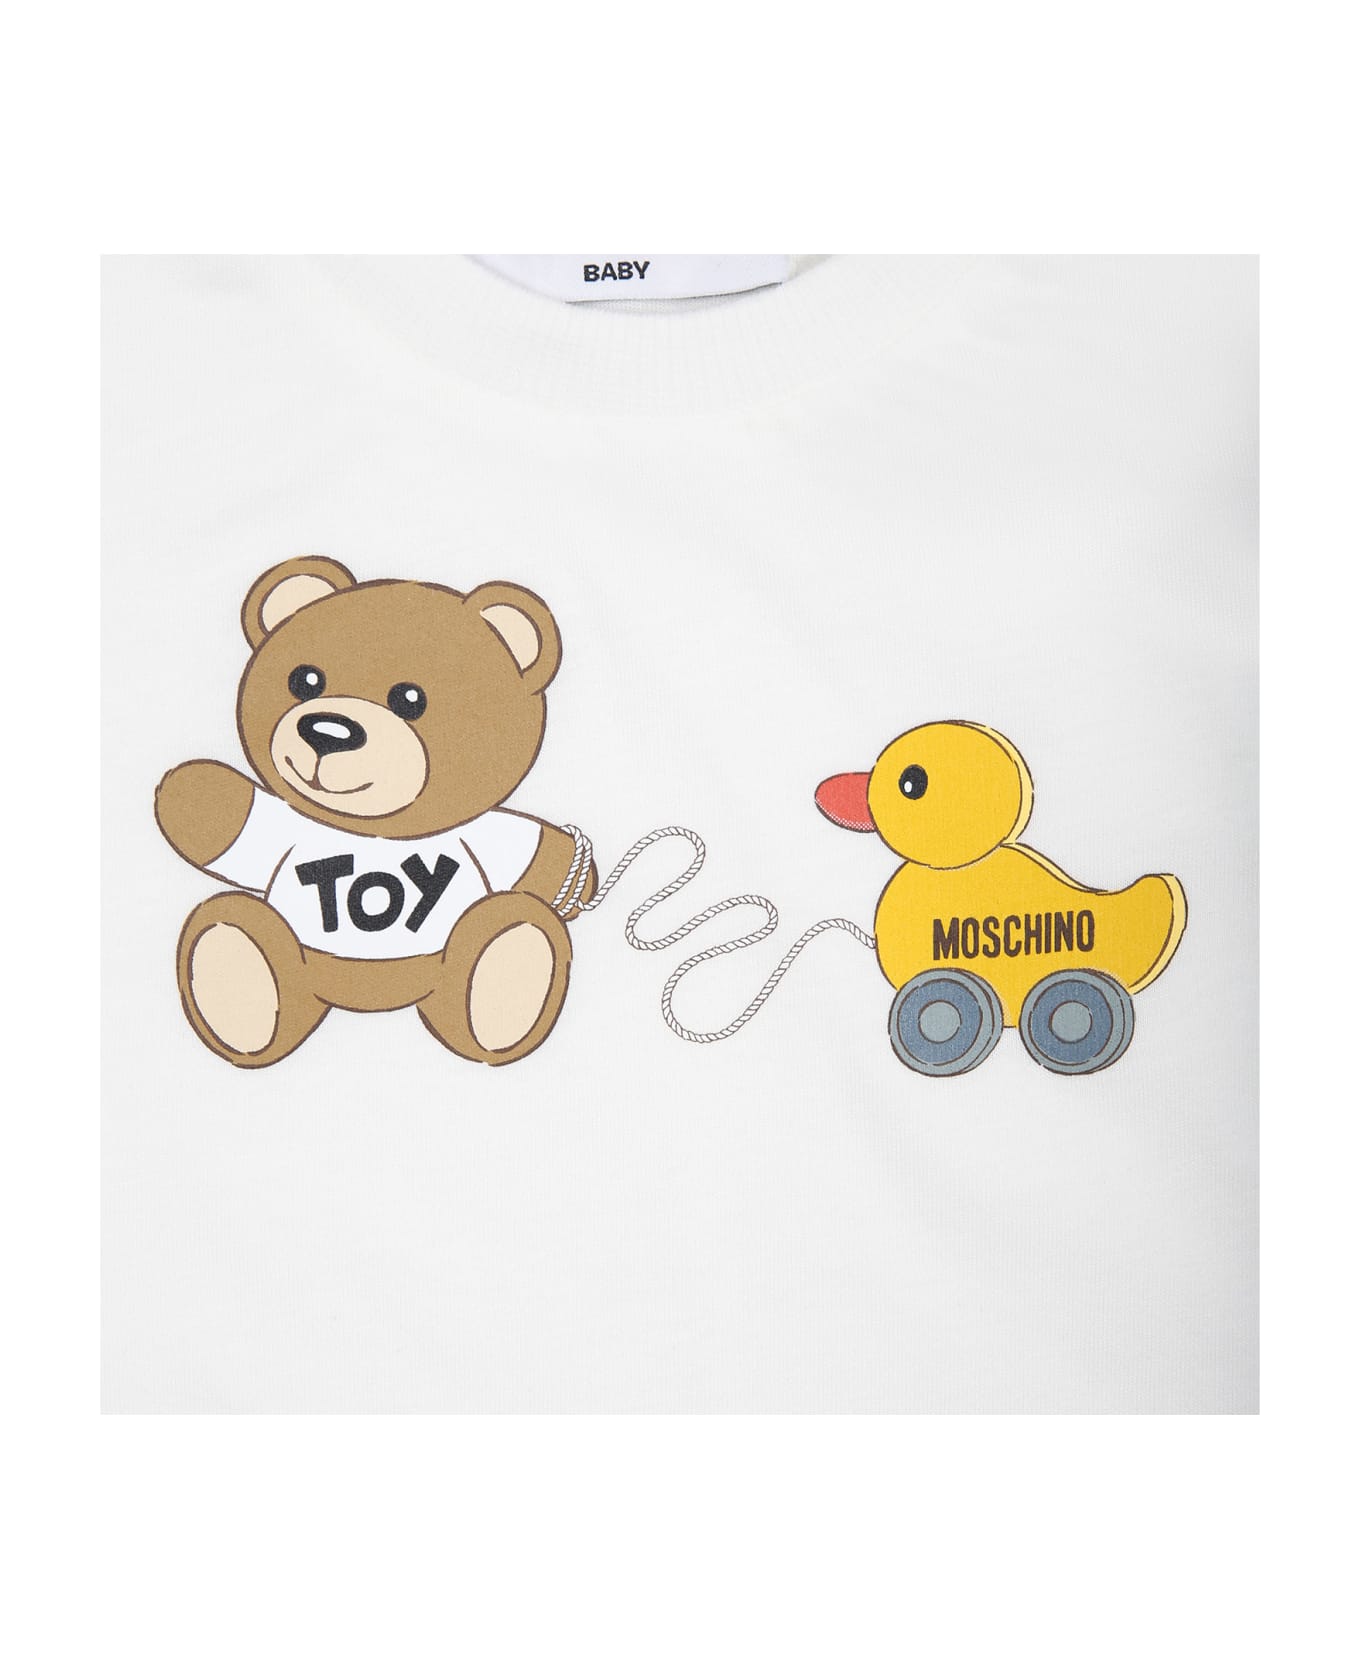 Moschino White T-shirt For Babies With Teddy Bear And Duck - White